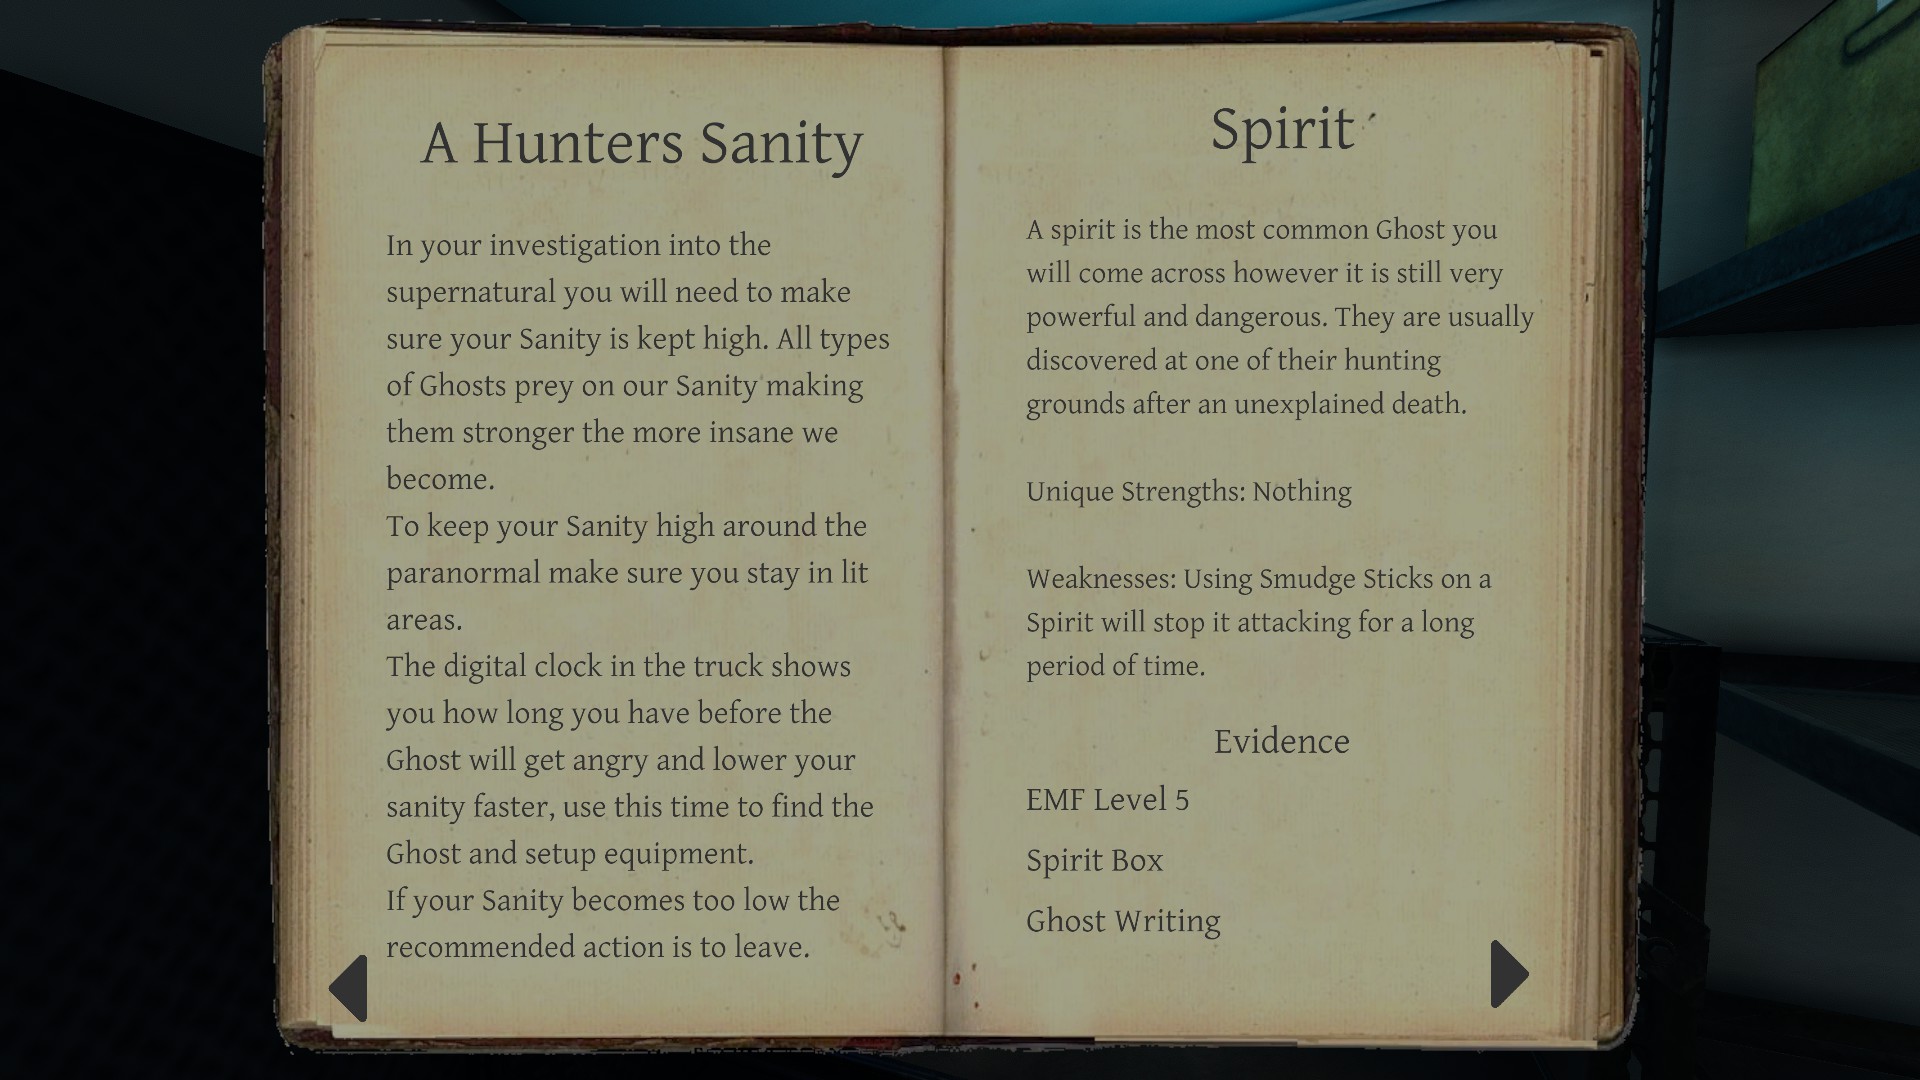 Phasmophobia List of New Ghosts in Game - All Evidence and Questions for Ghost Guide - Spirit - B85465E